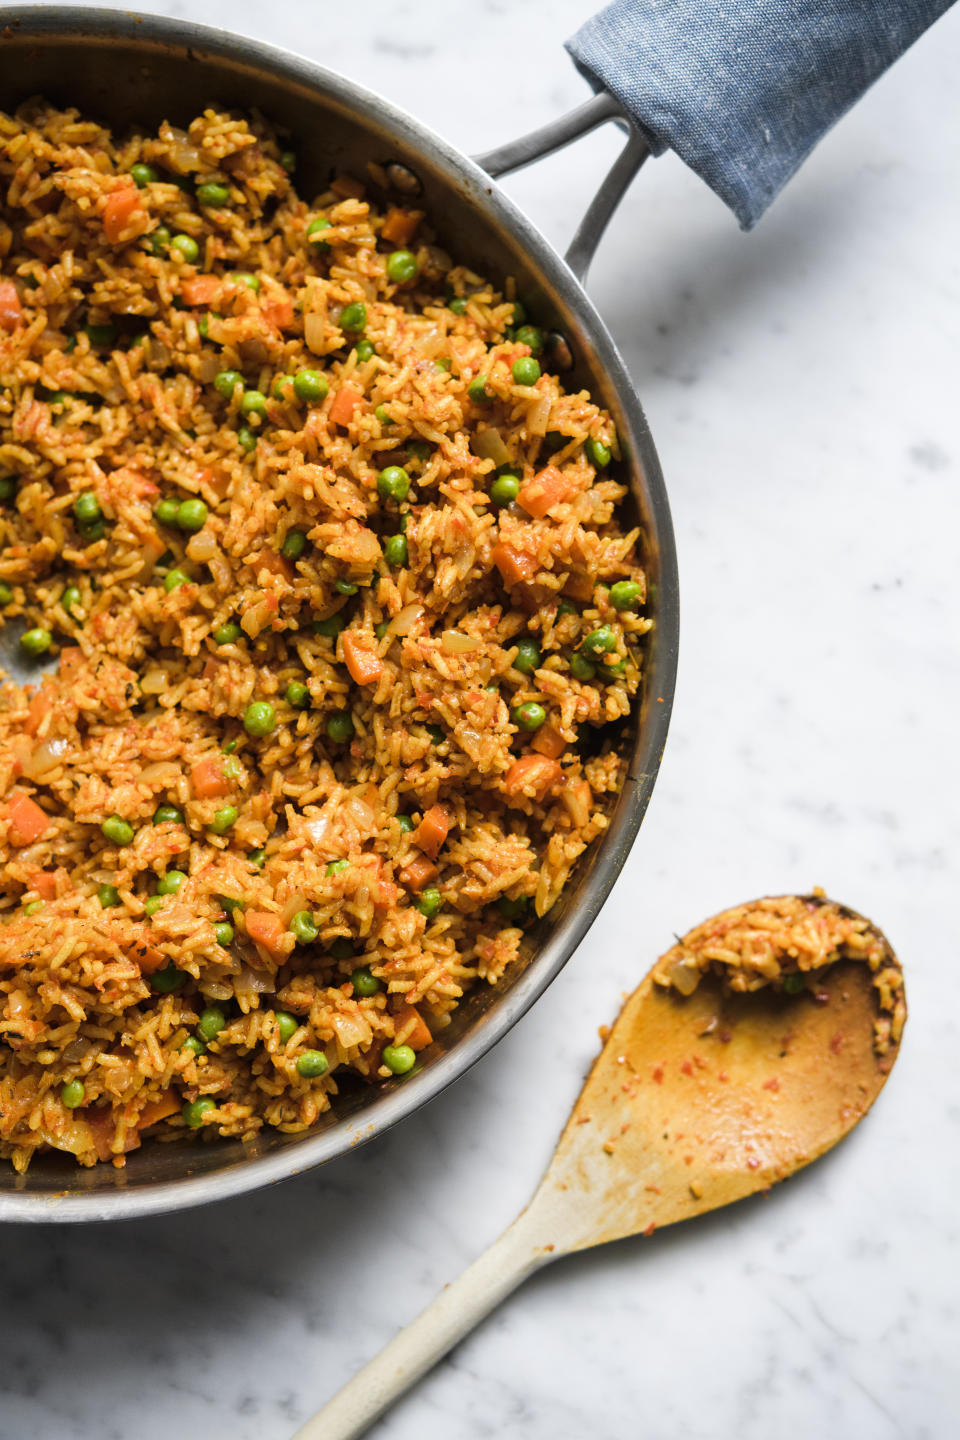 This image released by Milk Street shows a recipe for Jollof Rice. (Milk Street via AP)